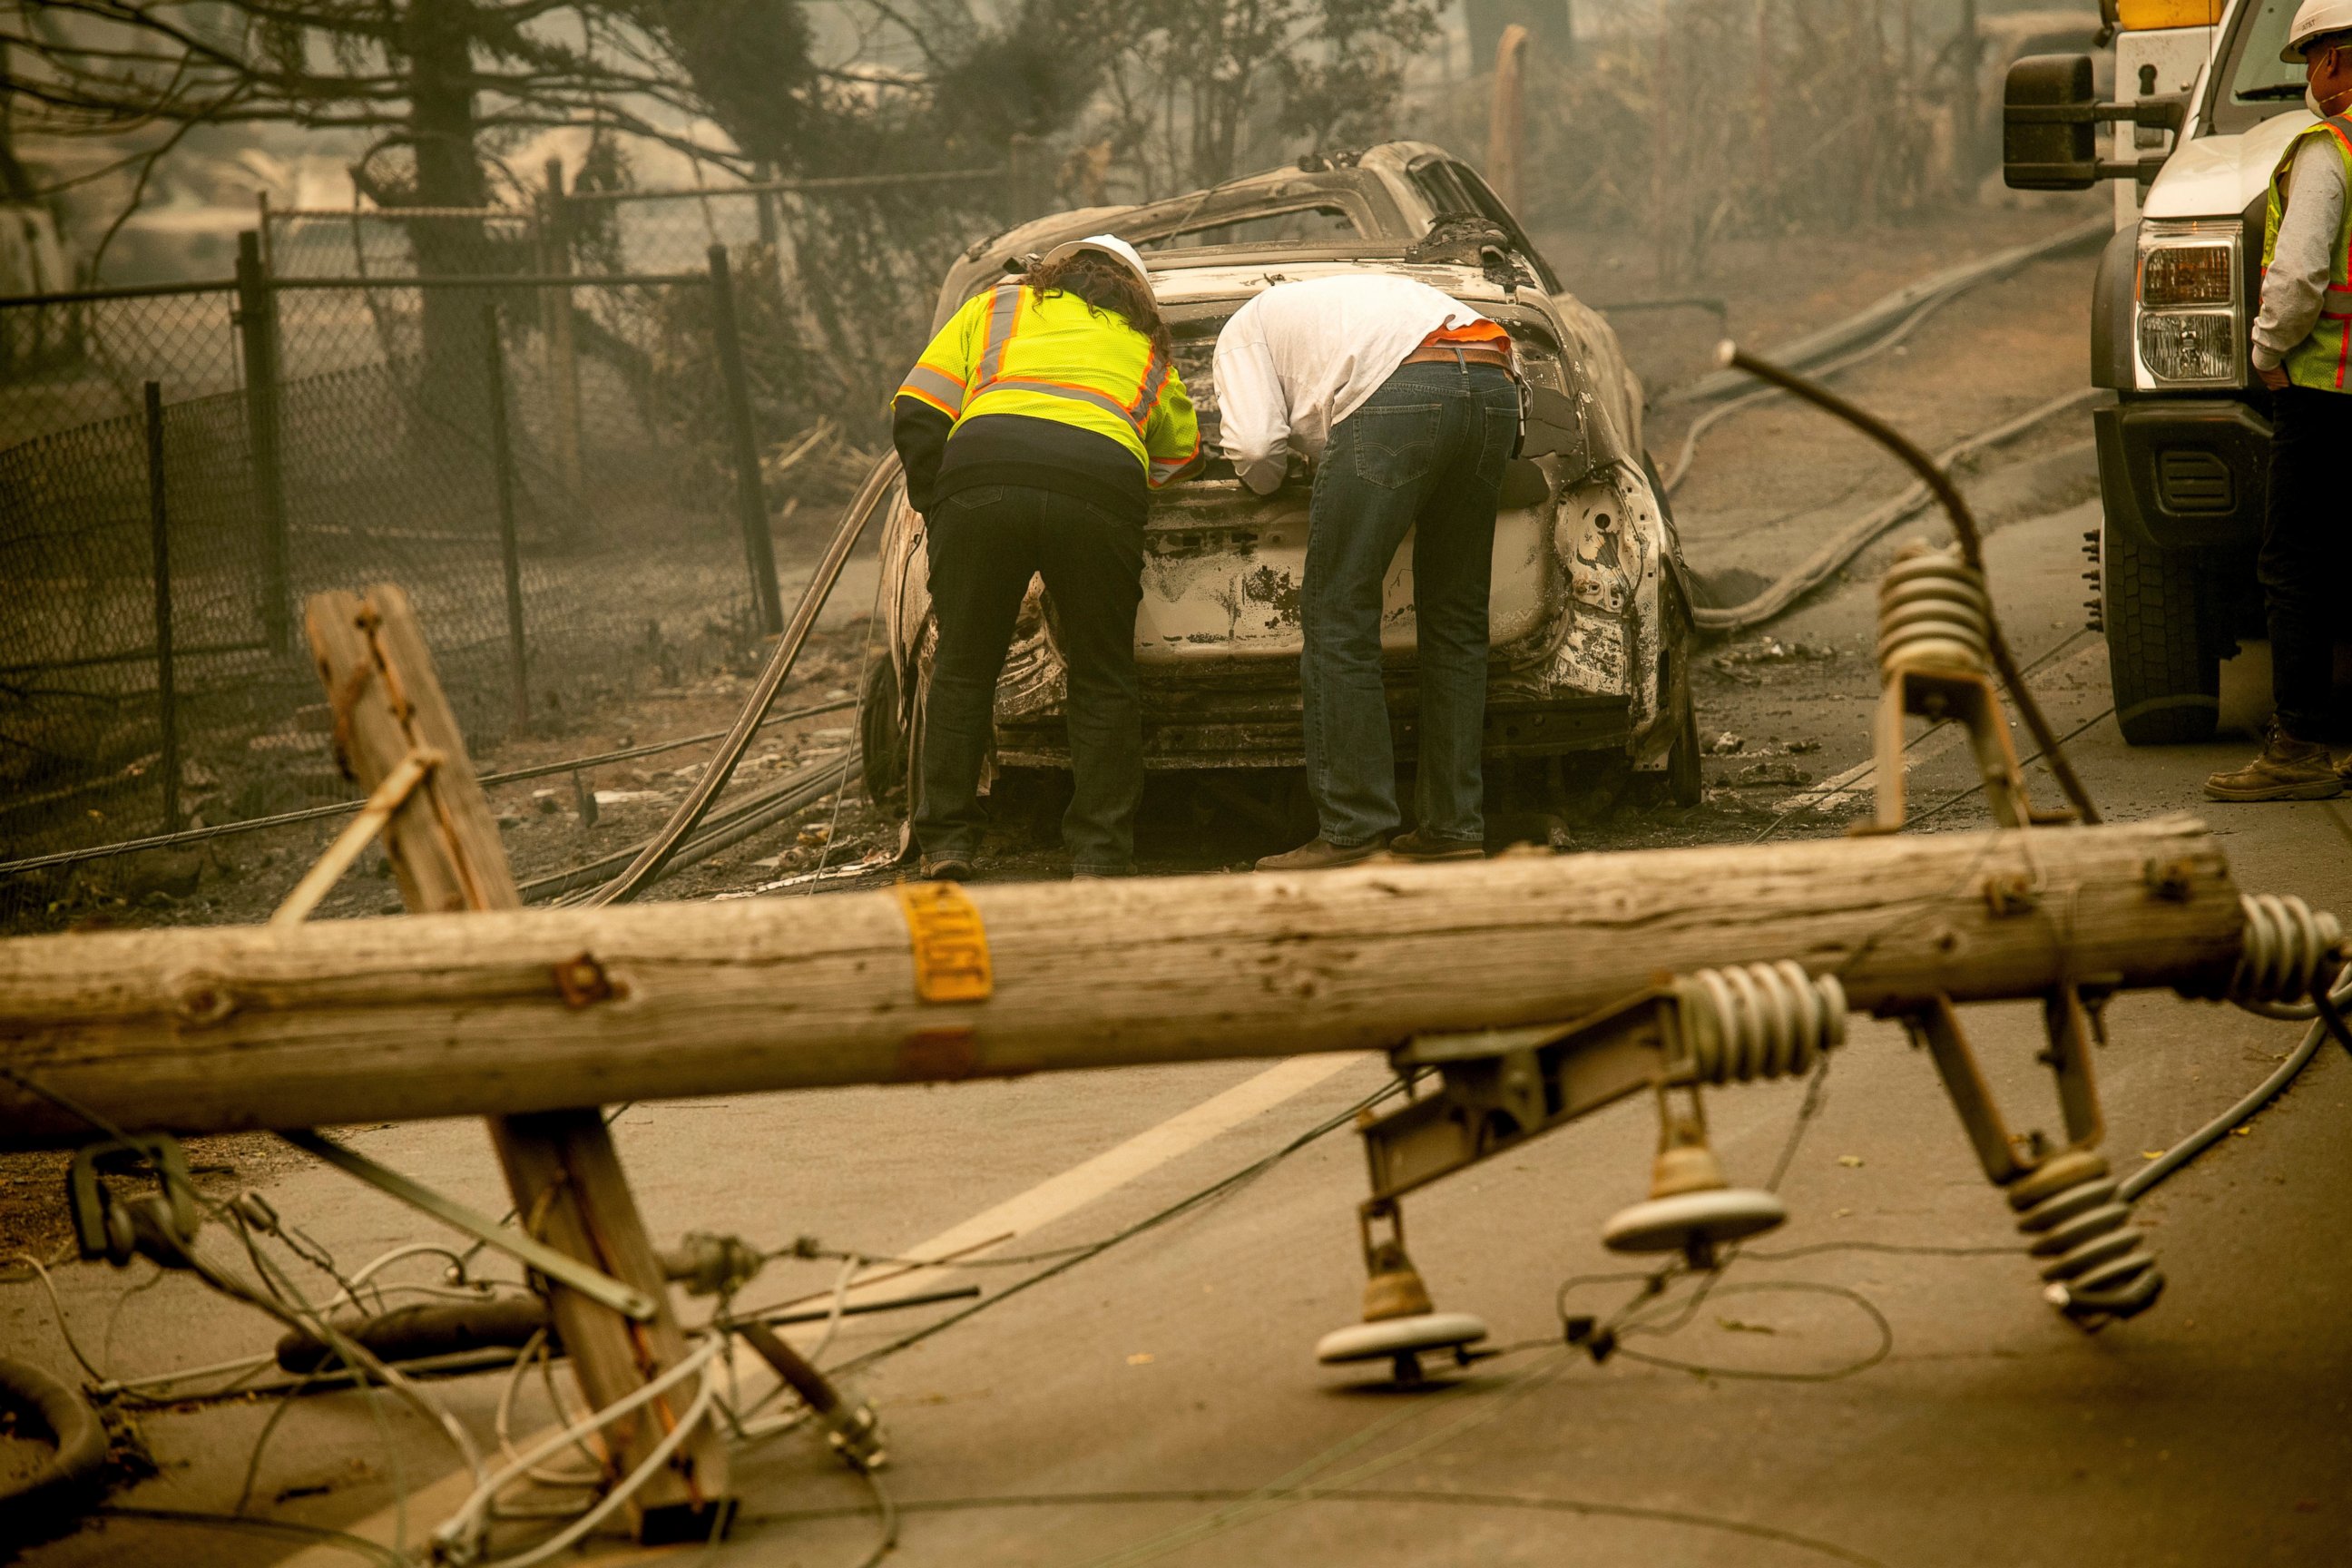 FILE - In this Nov. 10, 2018 file photo, with a downed power utility pole in the foreground, Eric England, right, searches through a friend's vehicle after the wildfire burned through Paradise, Calif. California’s largest utility company is getting b